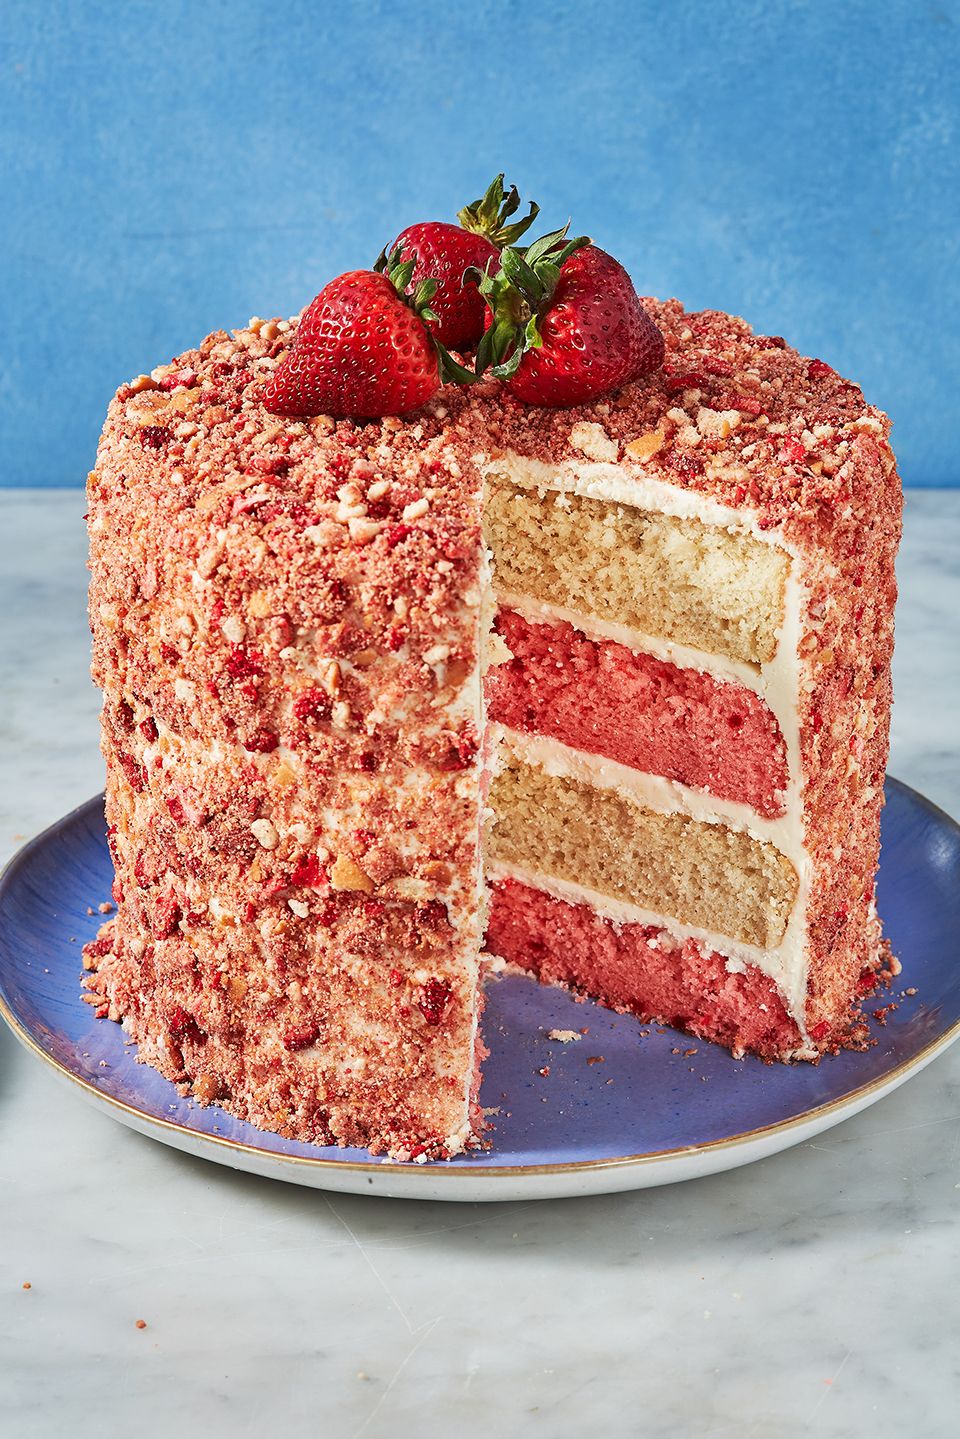 strawberry crunch cake on a blue plate